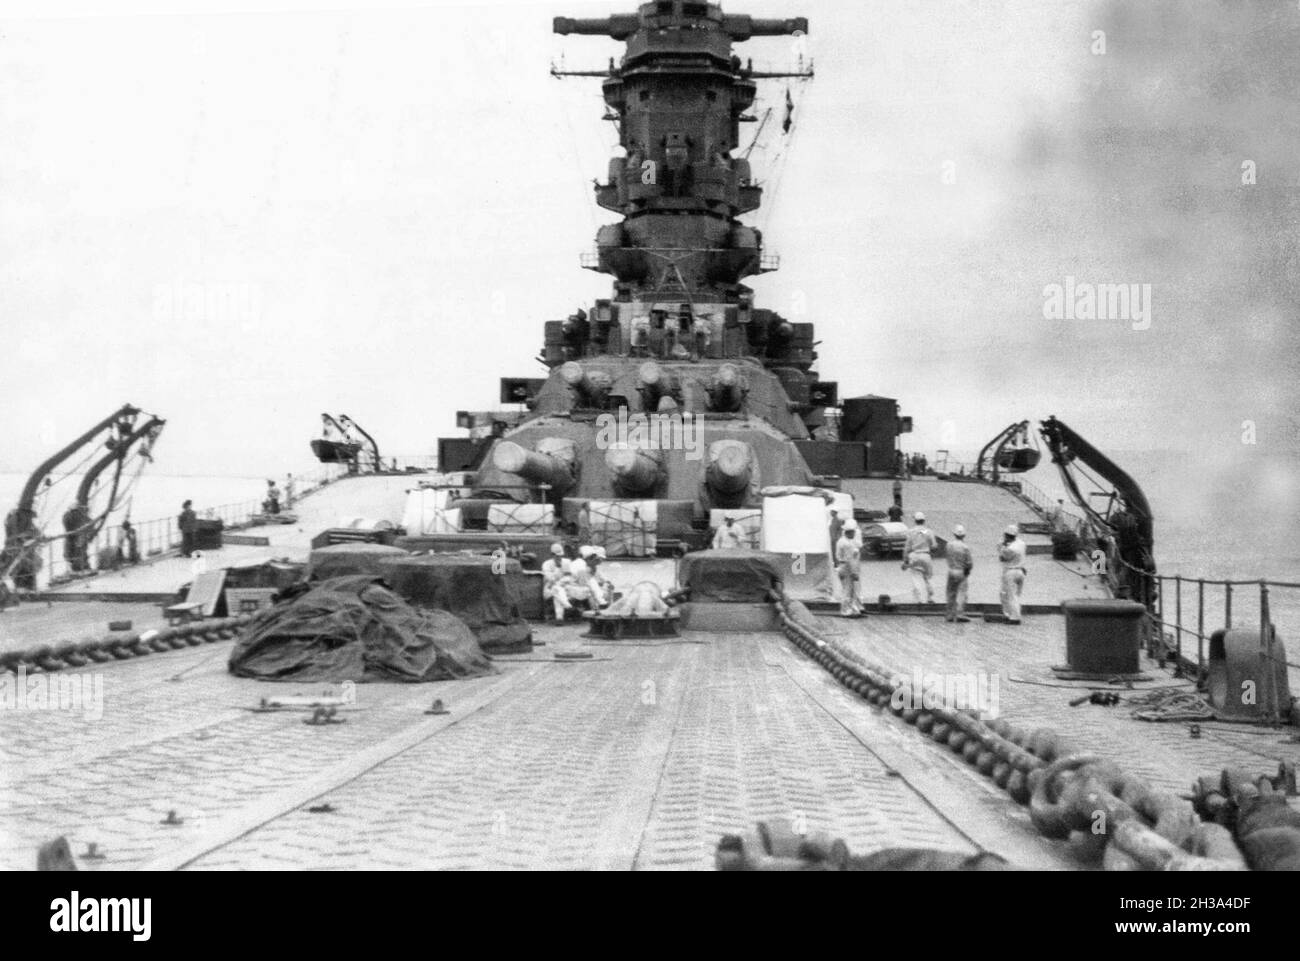 Japanese Battleship Musashi taken from the bow (August 1942): Its Post-Treaty Battleship. Leadship Yamato laid down on 4 November 1937, and Musashi laid down on 29 March 1938. Displacement is 69,000 tons, main guns are 9 × 460 mm Stock Photo